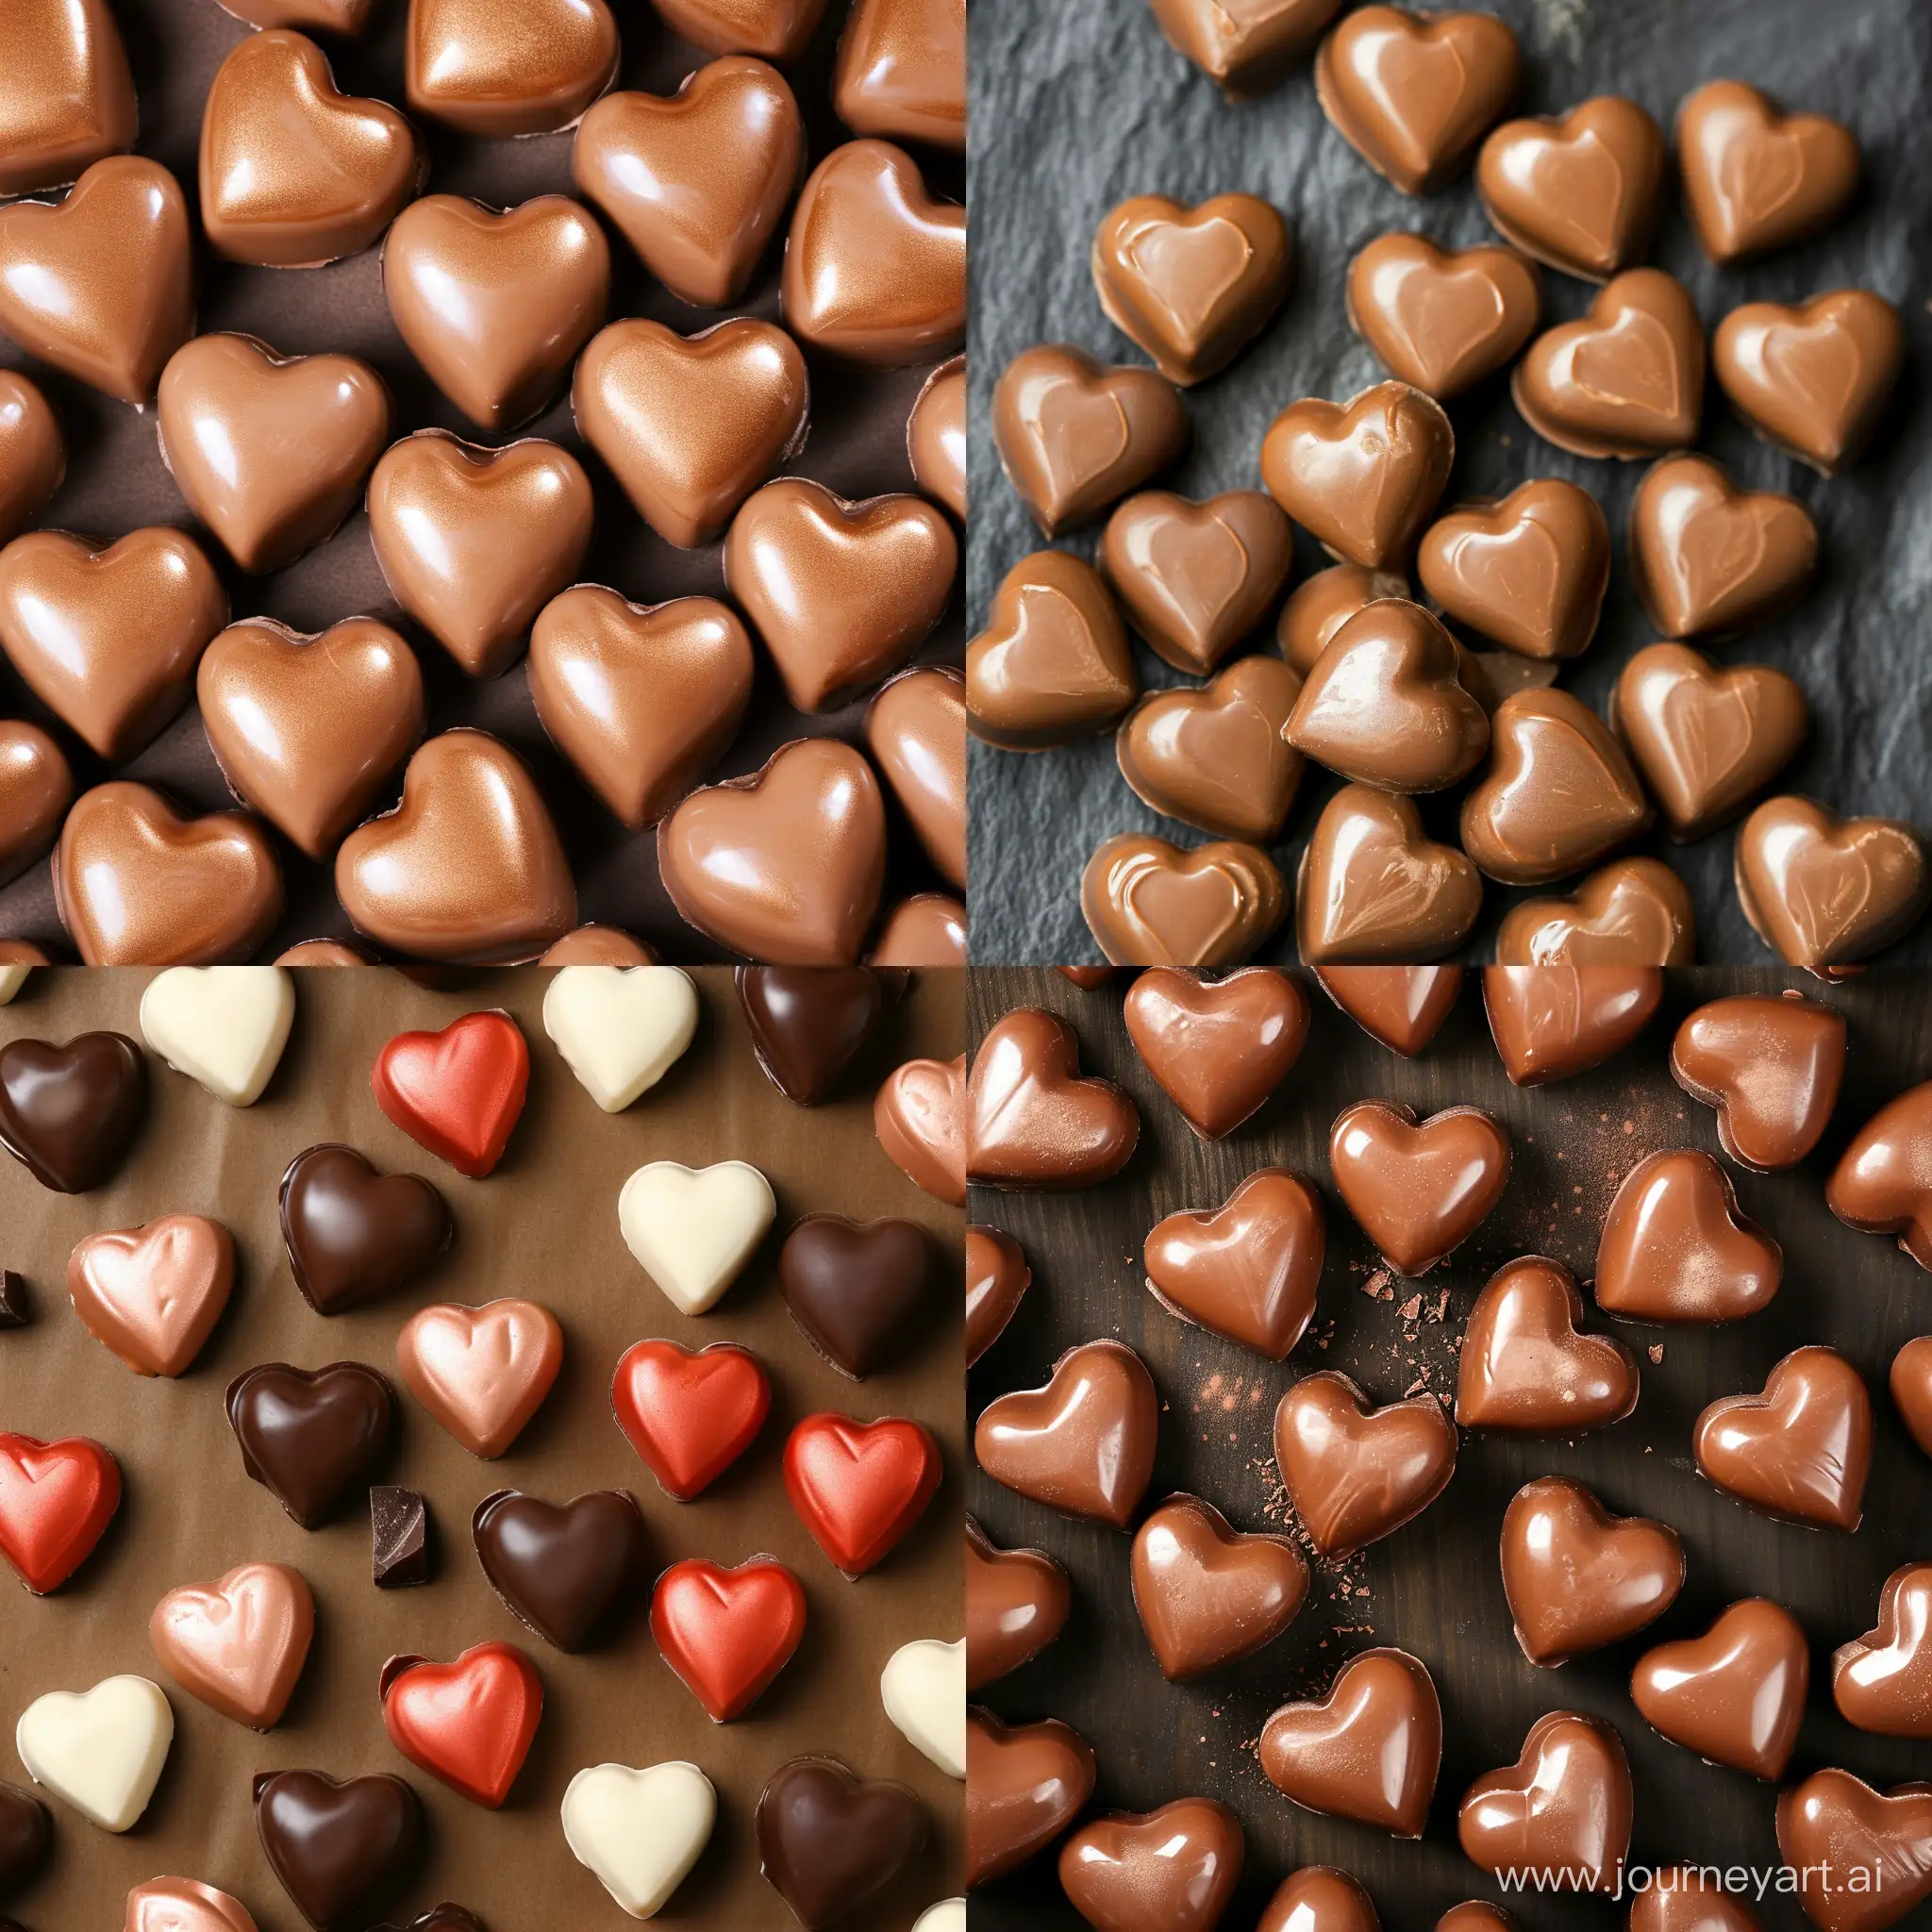 Romantic-Chocolate-Hearts-Candies-Background